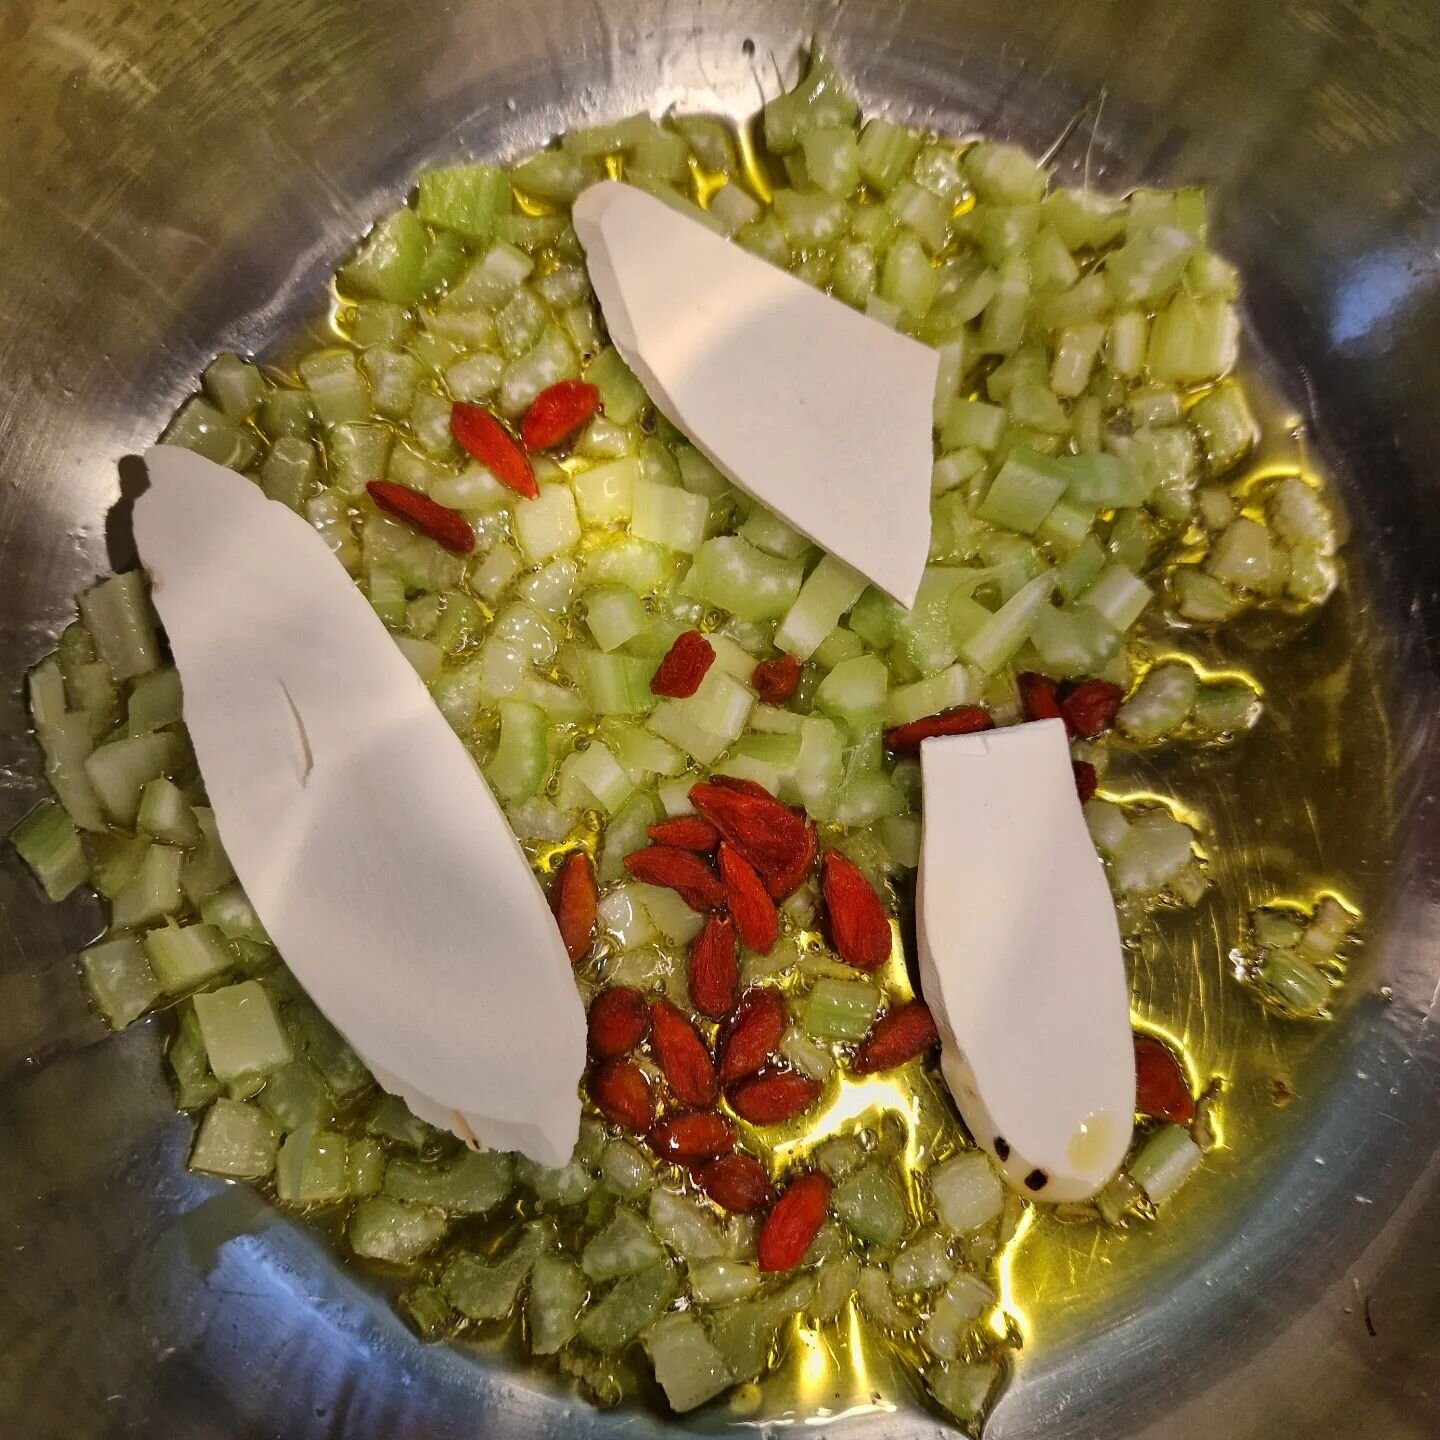 Nourishing Chinese Herbal Medicine chicken soup for my boys. Chinese Yam (Shan Yao) and Goji Berries (Gou Qi Zi) heavily feature in this incredibly tonifying soup ahead of tonight's night hike. Boys are going out, and I am staying in, so I'm cooking 